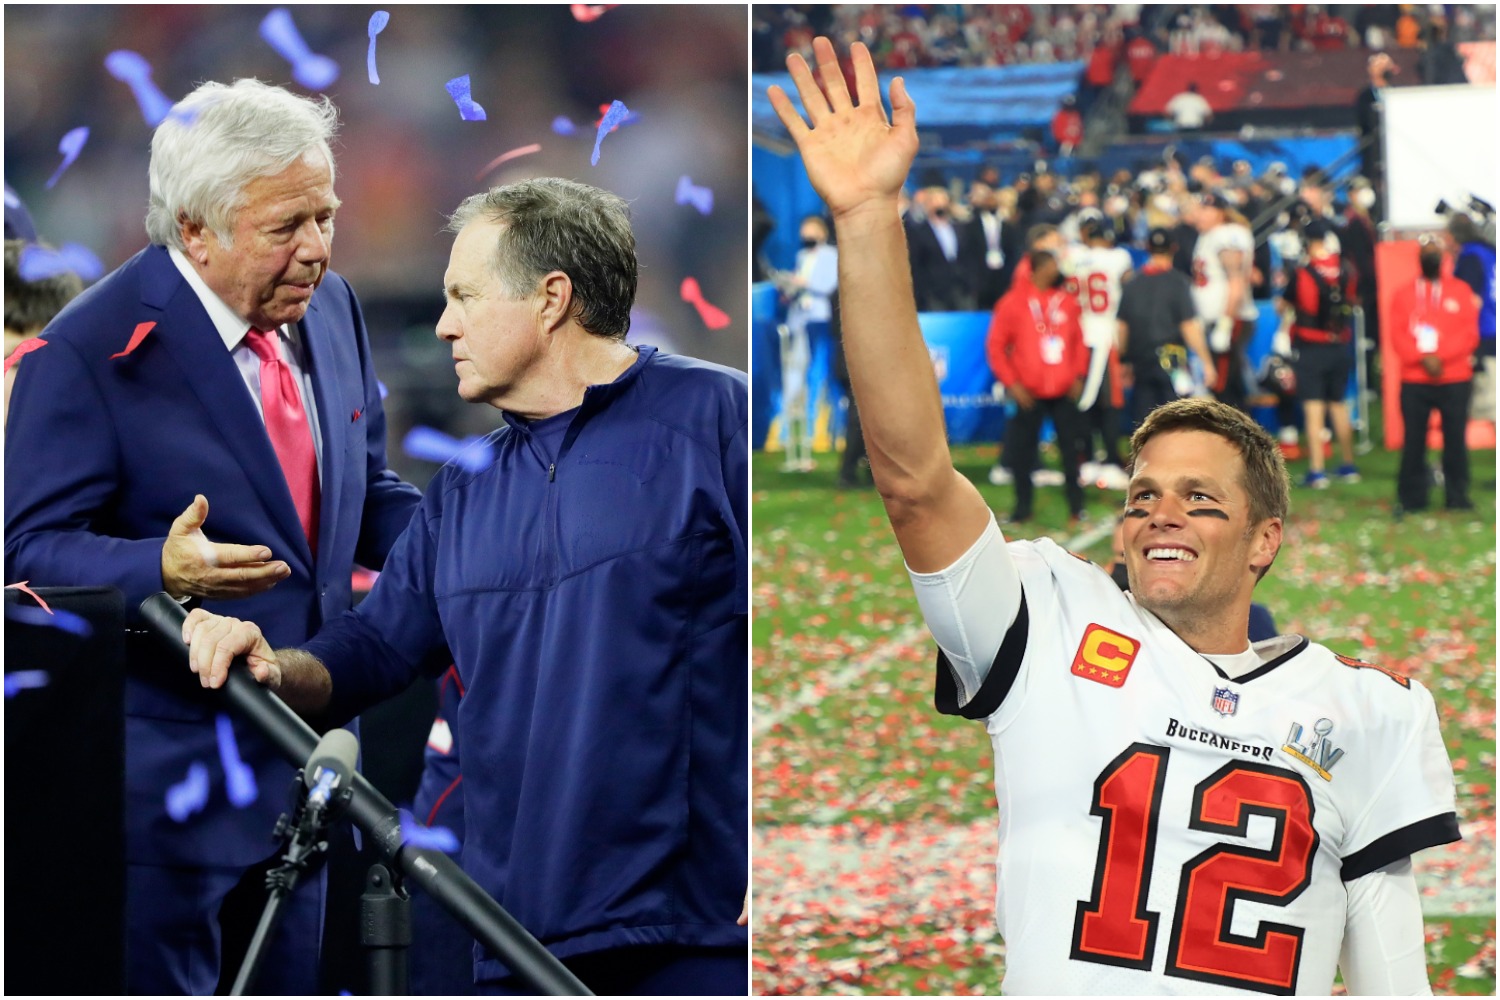 Patriots owner Robert Kraft talks to Bill Belichick after Super Bowl 51 as Tom Brady celebrates winning Super Bowl 55 with the Buccaneers.